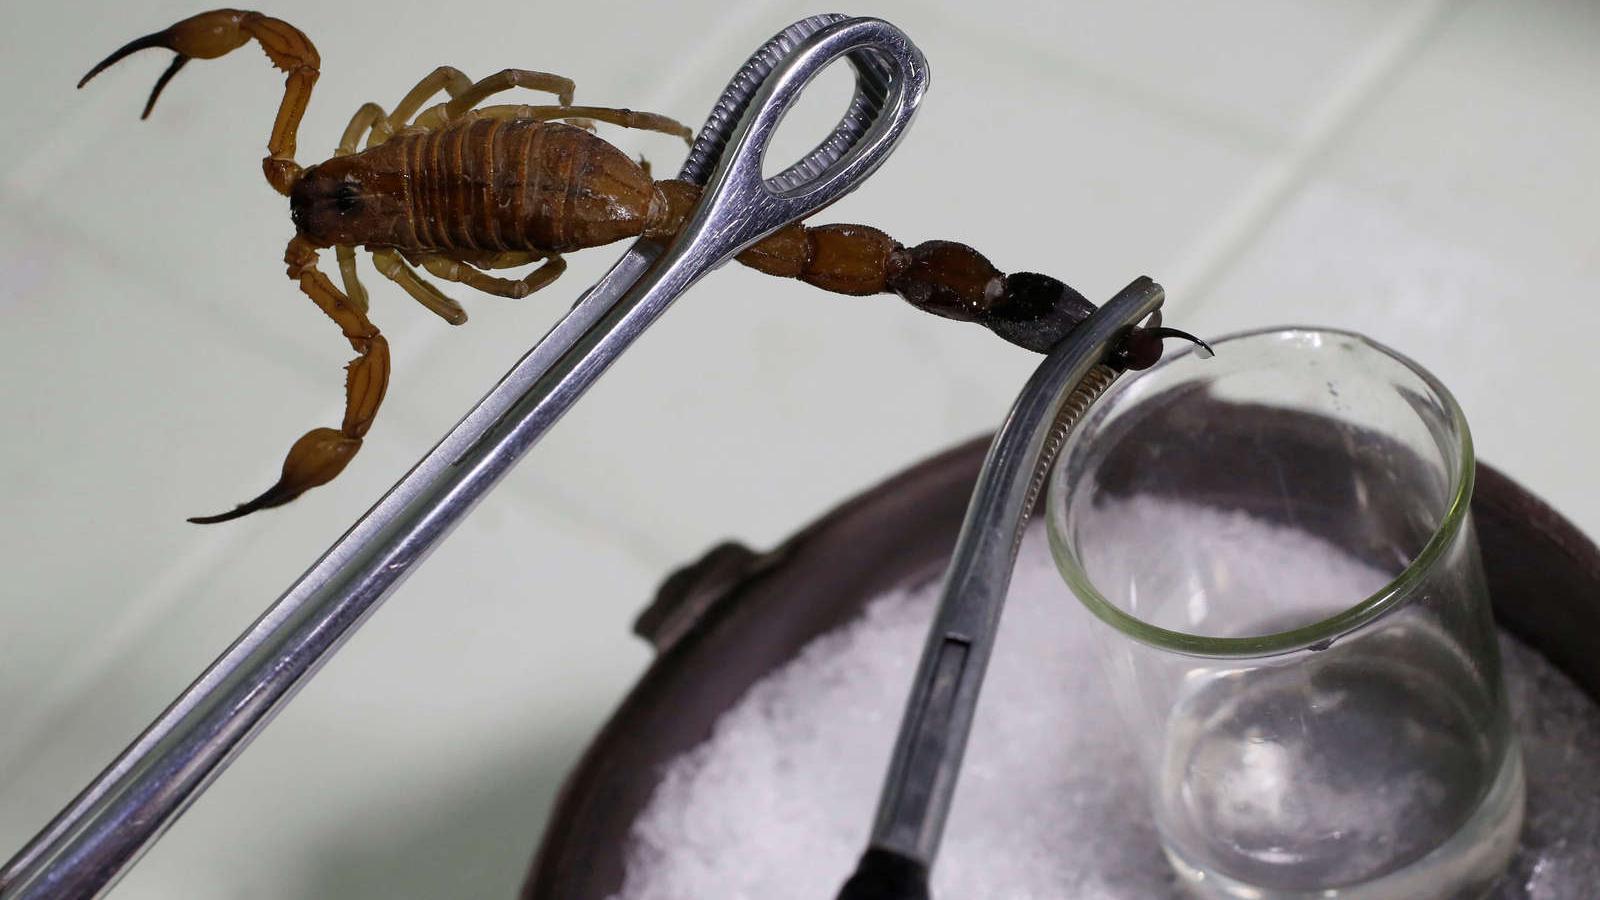 A close up of a scorpion pinched with tool held above a glass jar.